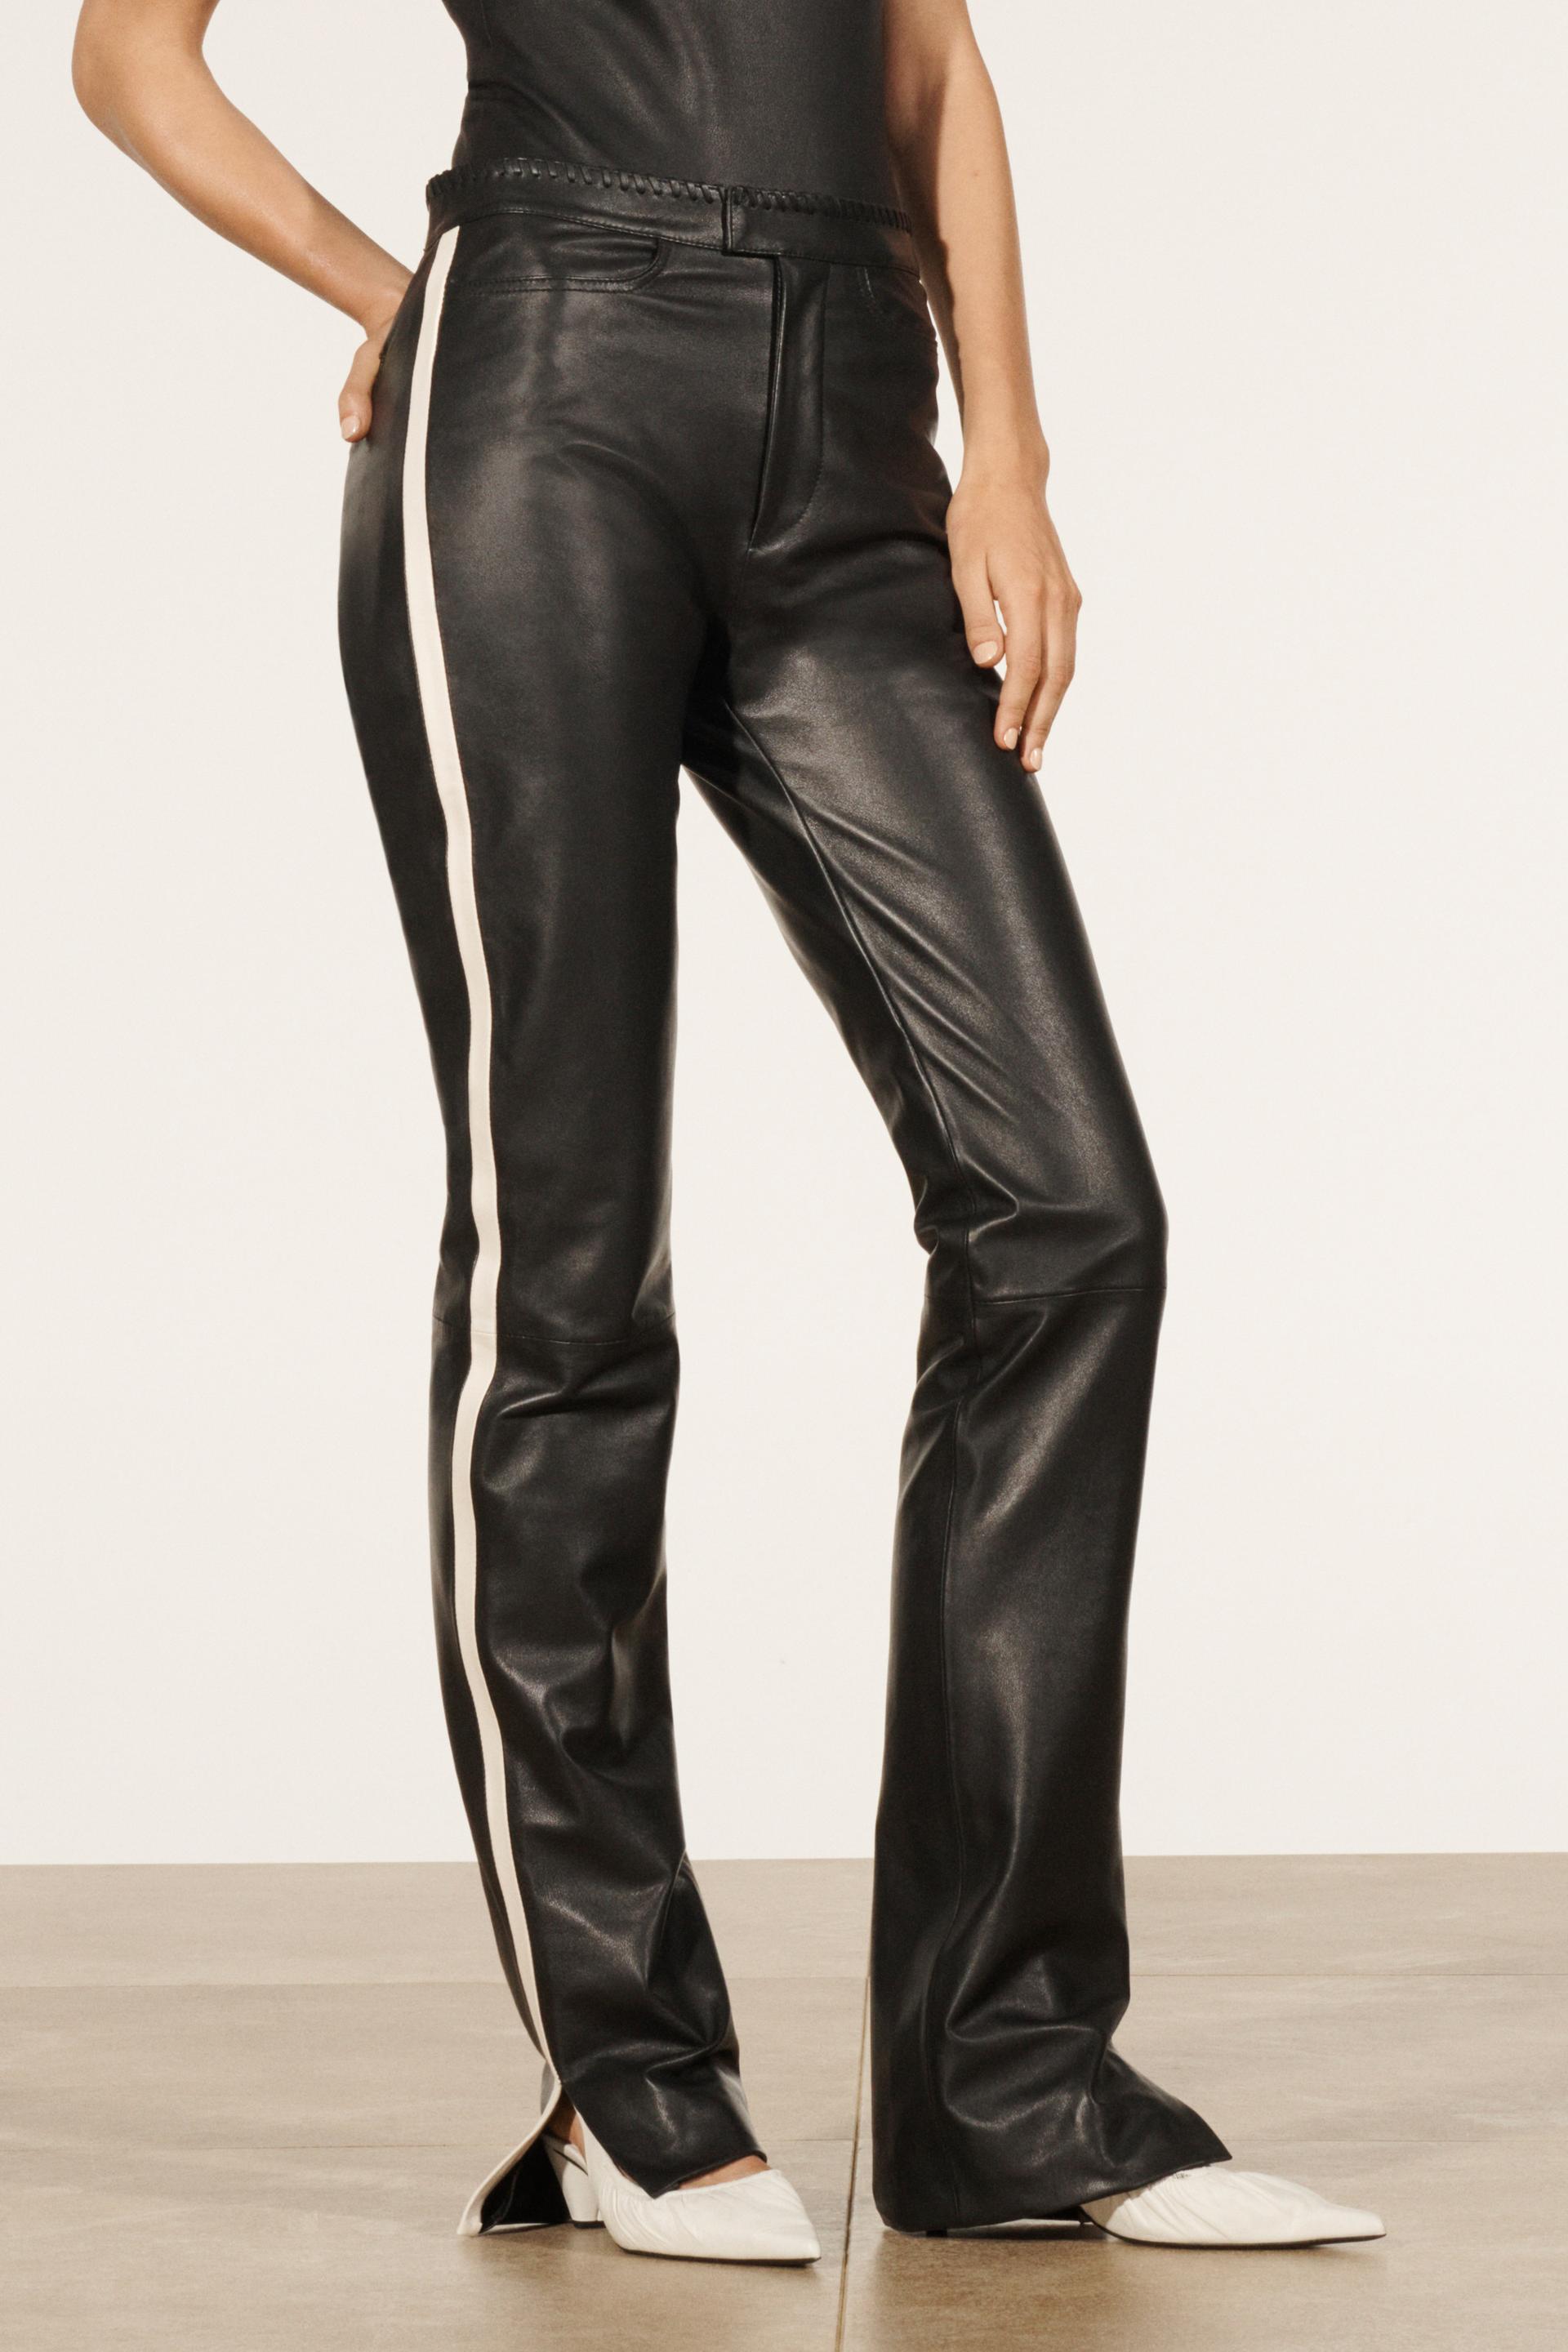 Zara 100% Polyester Solid Black Faux Leather Pants Size XS - 71